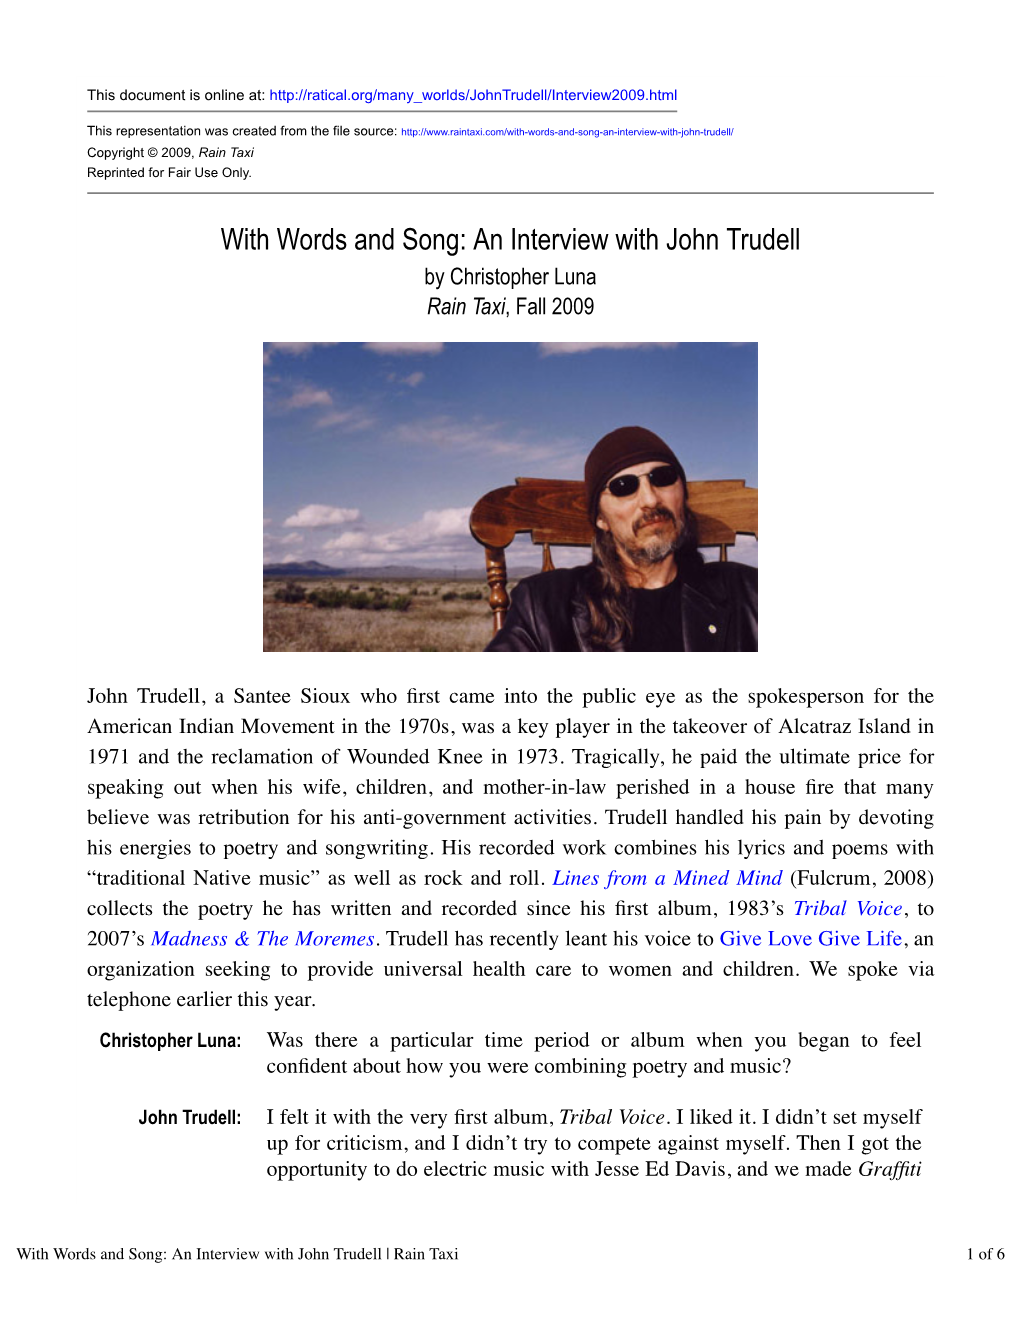 An Interview with John Trudell by Christopher Luna Rain Taxi, Fall 2009